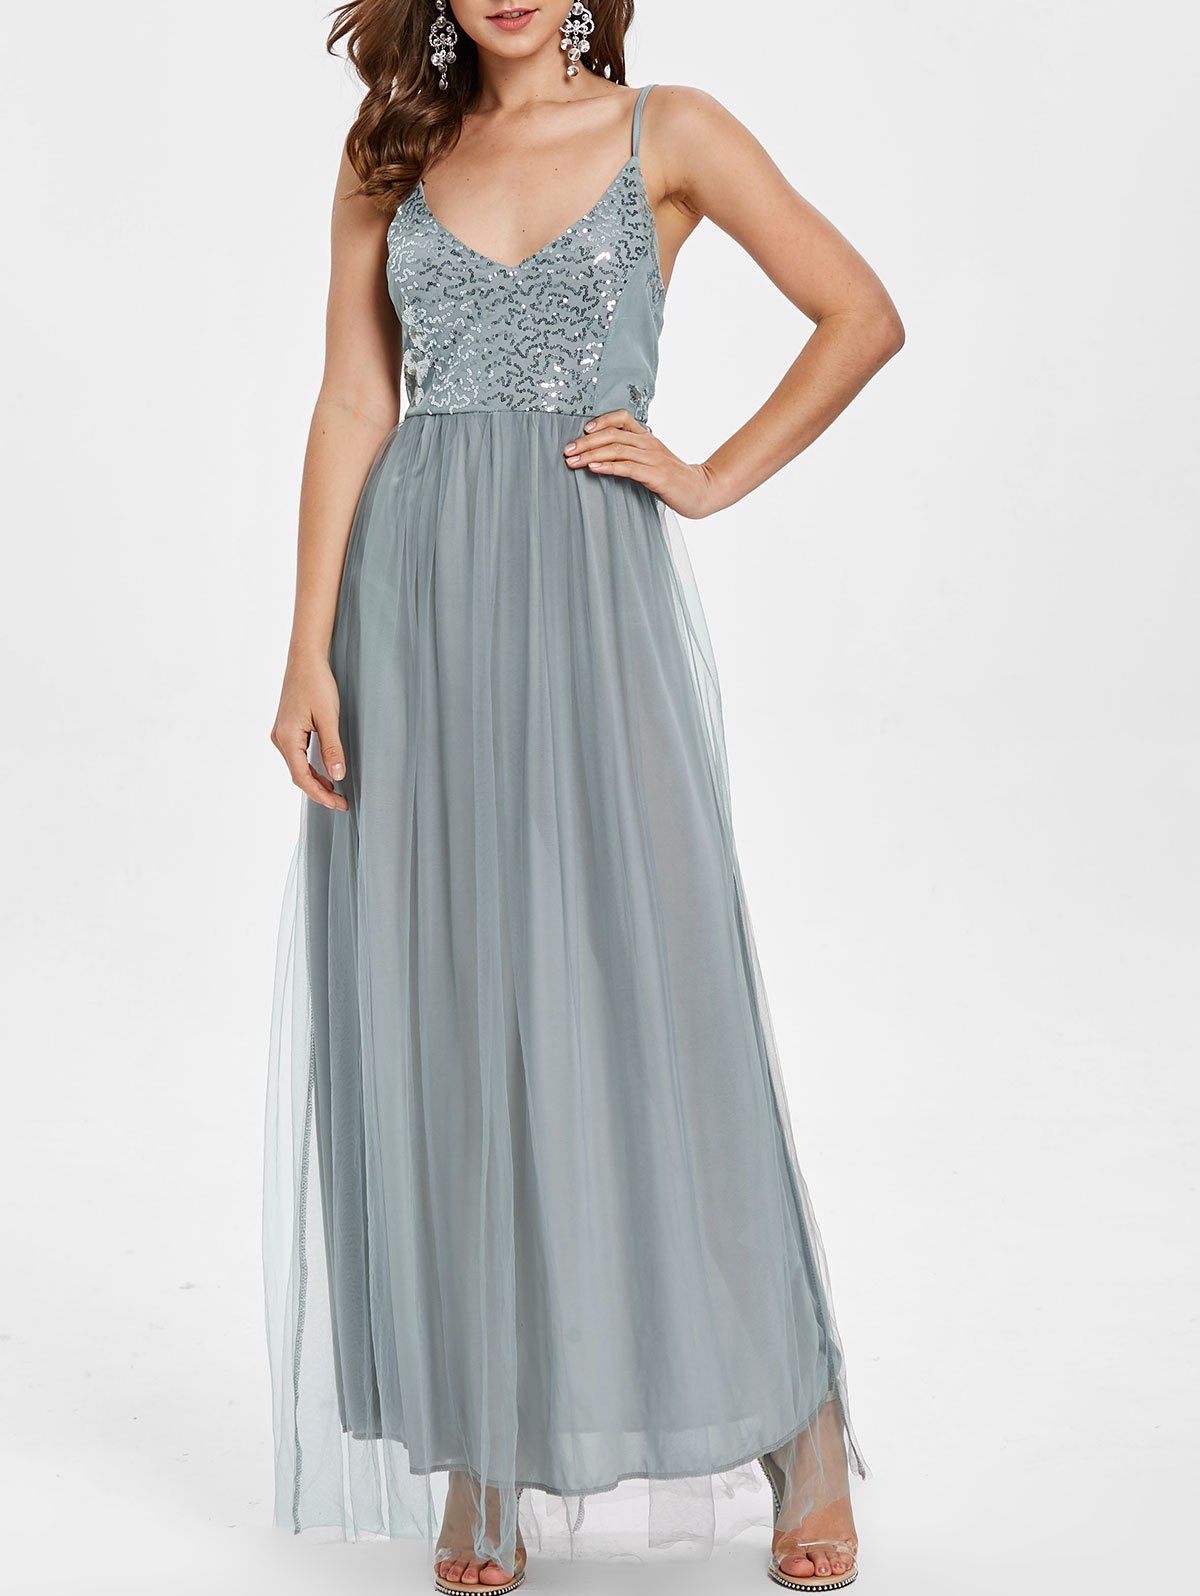 [41% OFF] 2022 Spaghetti Strap Sequins Mesh Prom Dress In BABY BLUE ...